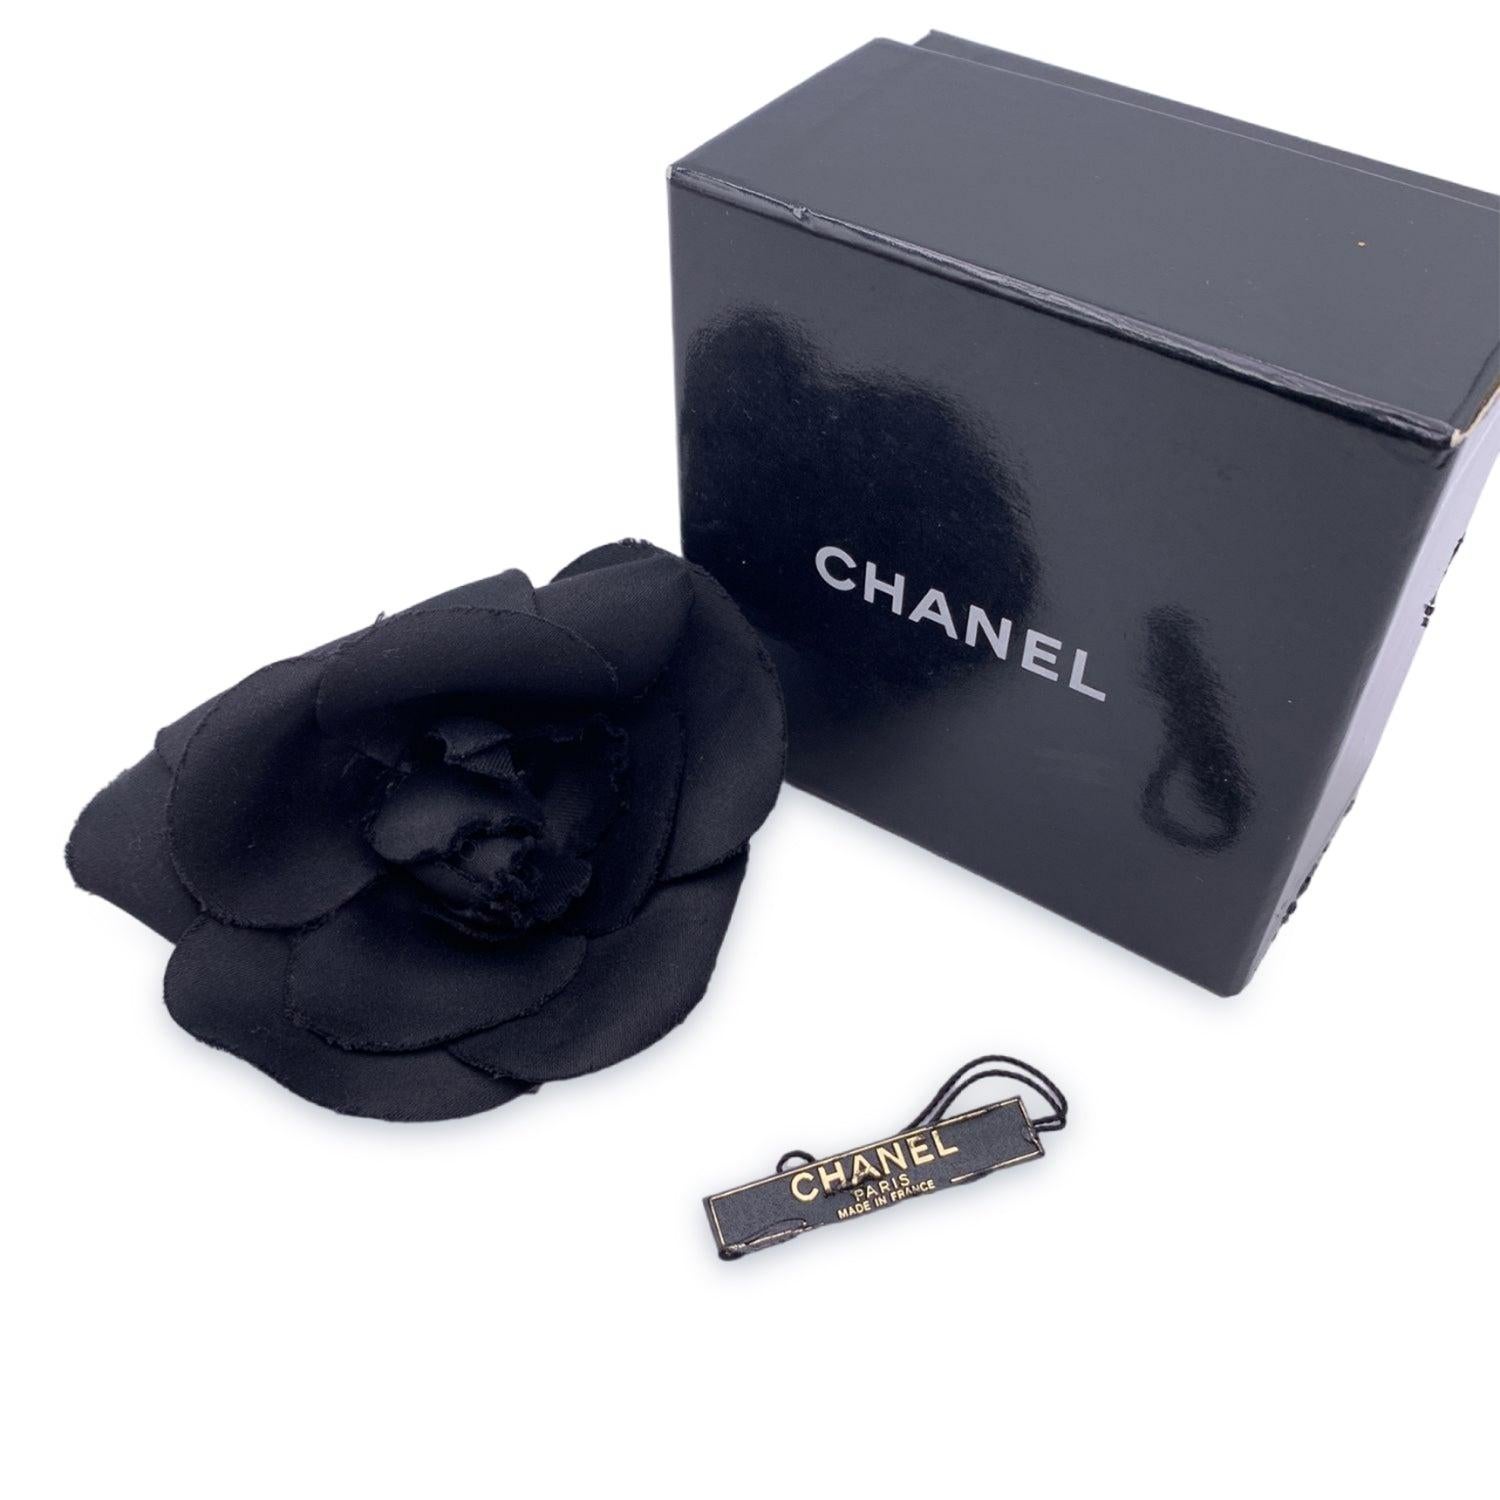 Chanel Vintage Camelia Camellia Flower Pin Brooch. Black silk petals. Safety pin closure. Measurements: diameter: 4 inches - 10.2 cm . 'CHANEL - CC - Made in France' oval tab on the back Condition B - VERY GOOD Gently used. Some glue residue on the